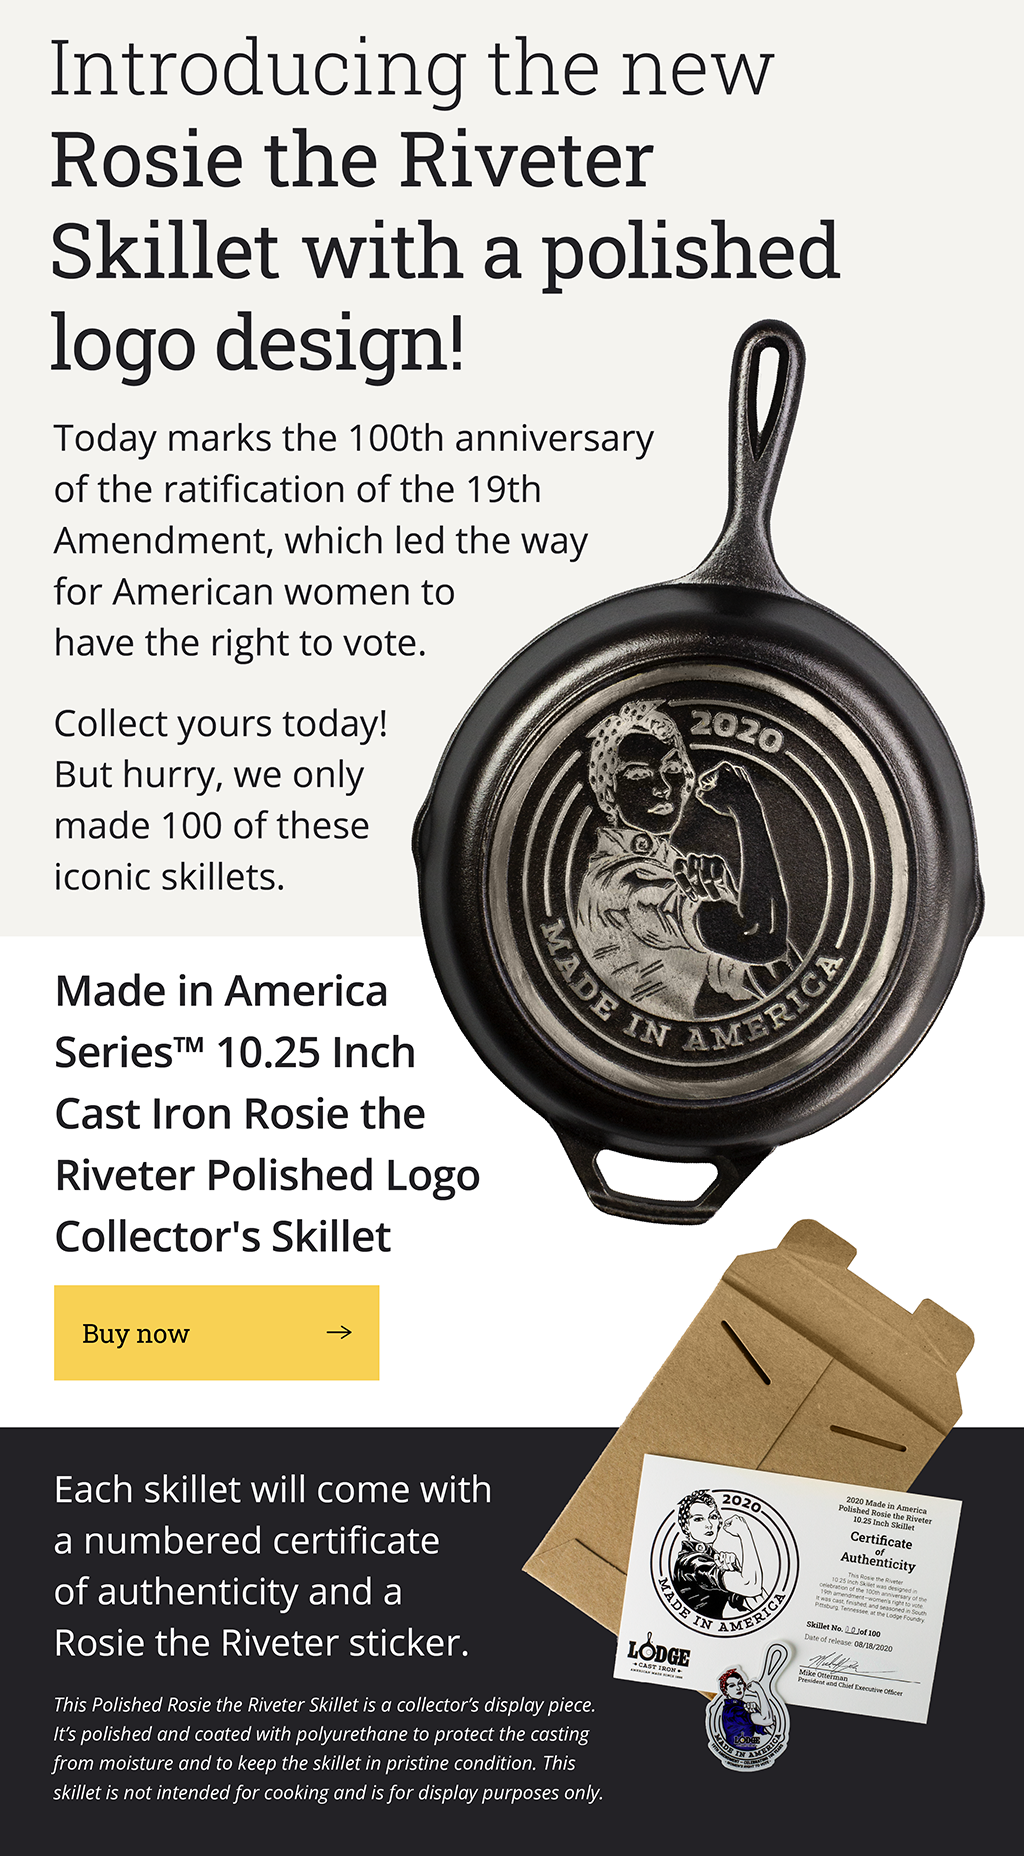 Introducing the new Rosie the Riveter Polished Collector''s Skillet Today marks the 100th anniversary of the ratification of the 19th Amendment, which led the way for American women to have the right to vote. Collect yours today! But hurry, we only made 100 of these iconic skillets.  [Product image] Made in America SeriesTM 10.25 Inch Cast Iron Rosie the Riveter Polished Skillet [Buy now -->] Each skillet will come with a numbered certificate of authentication and a Rosie the Riveter sticker. (Disclaimer) This Polished Rosie the Riveter Skillet is a collector's display piece. It's polished and coated with polyurethane to protect the casting from
 moisture and to keep the skillet in pristine condition. This skillet is not intended for cooking and is for display purposes only.